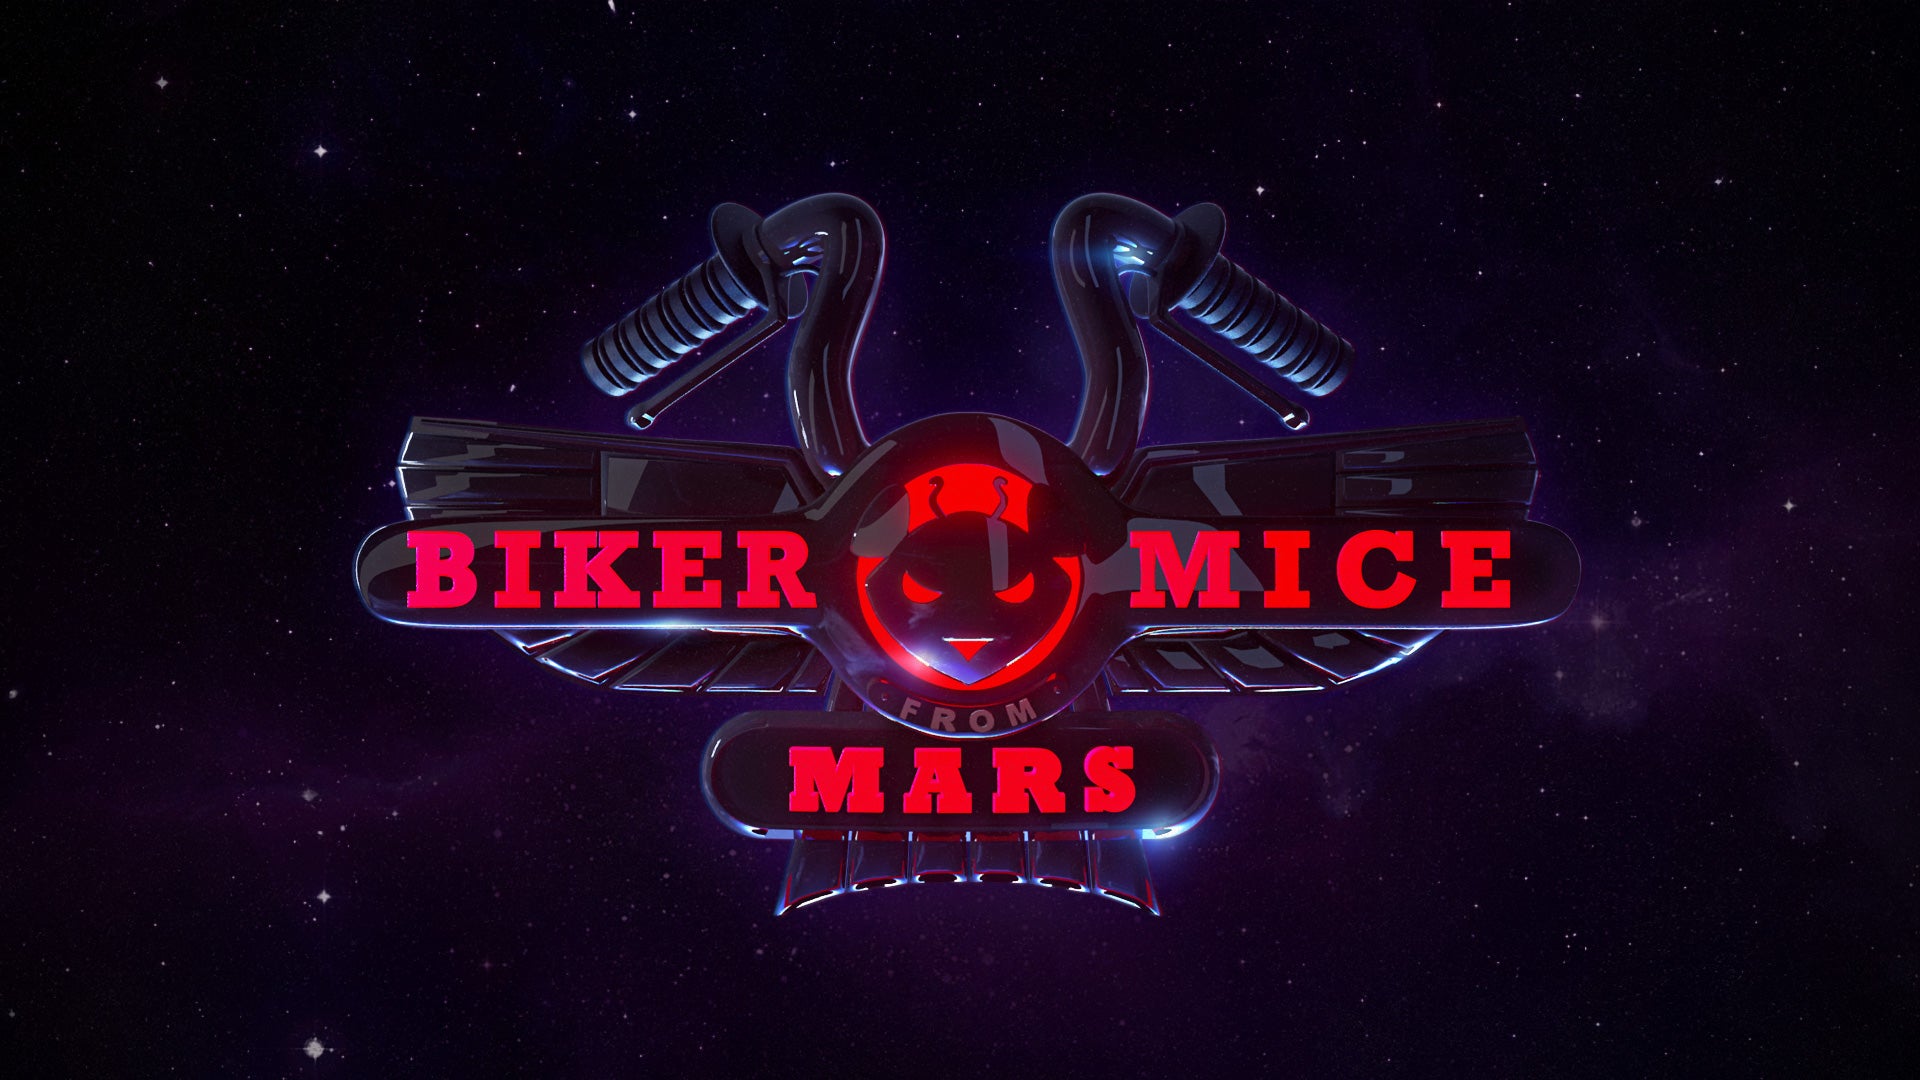 I made my own 3D version of the Biker Mice logo!